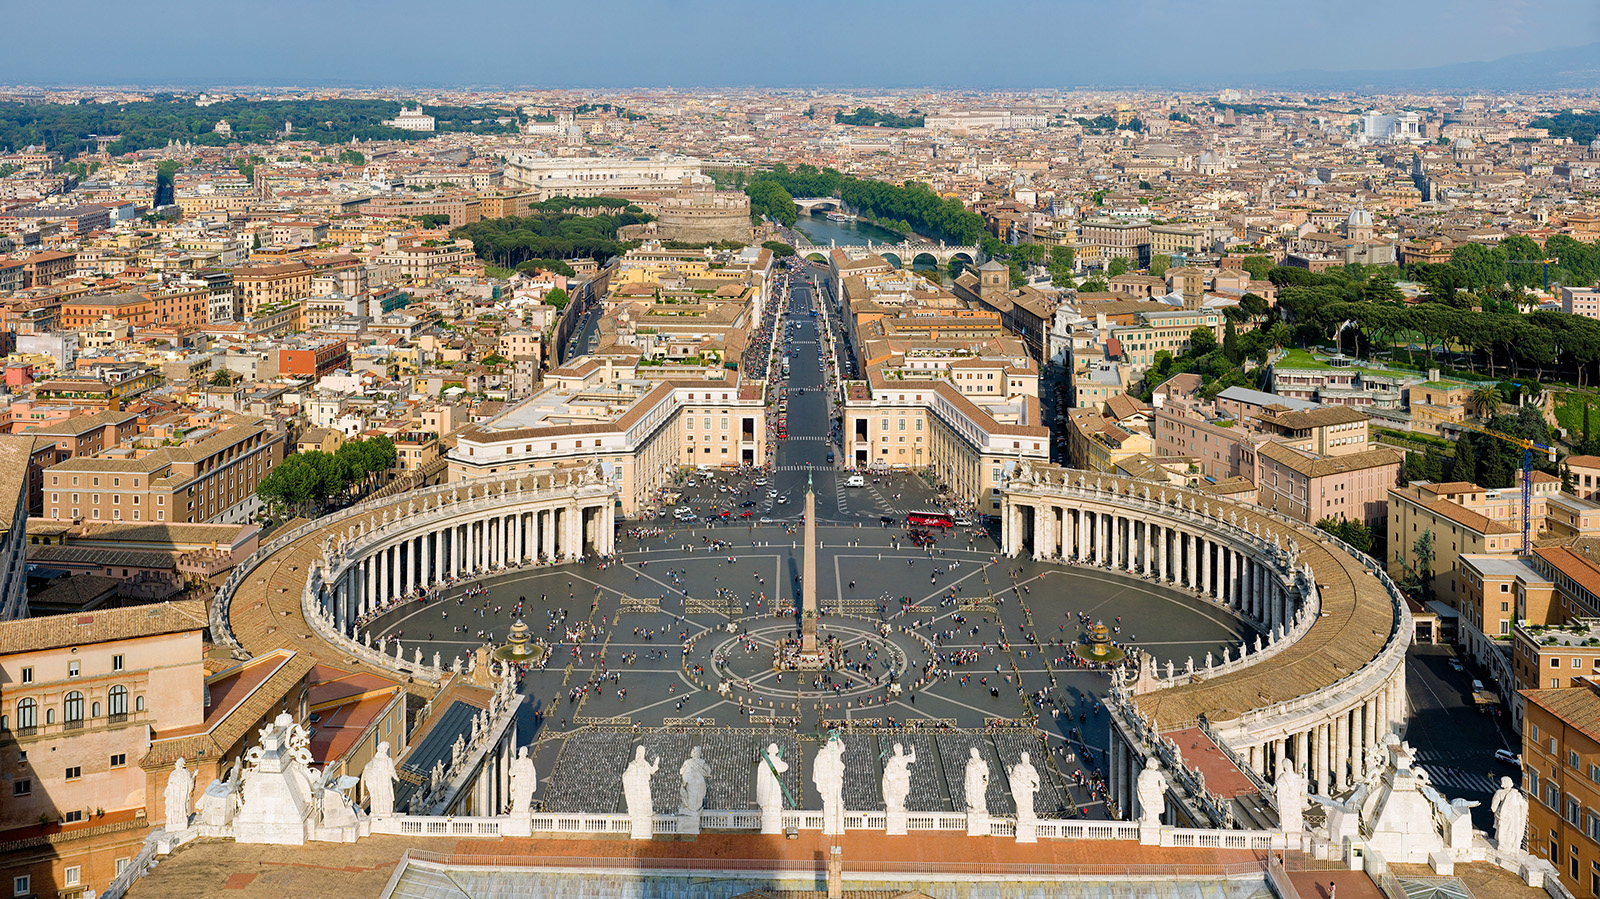 A view of St. Peter’s Square, Vatican City, and Rome from the top of Michelangelo’s dome in St. Peter’s Basilica. Photo by David Iliff/Creative Commons/CC BY-SA 3.0